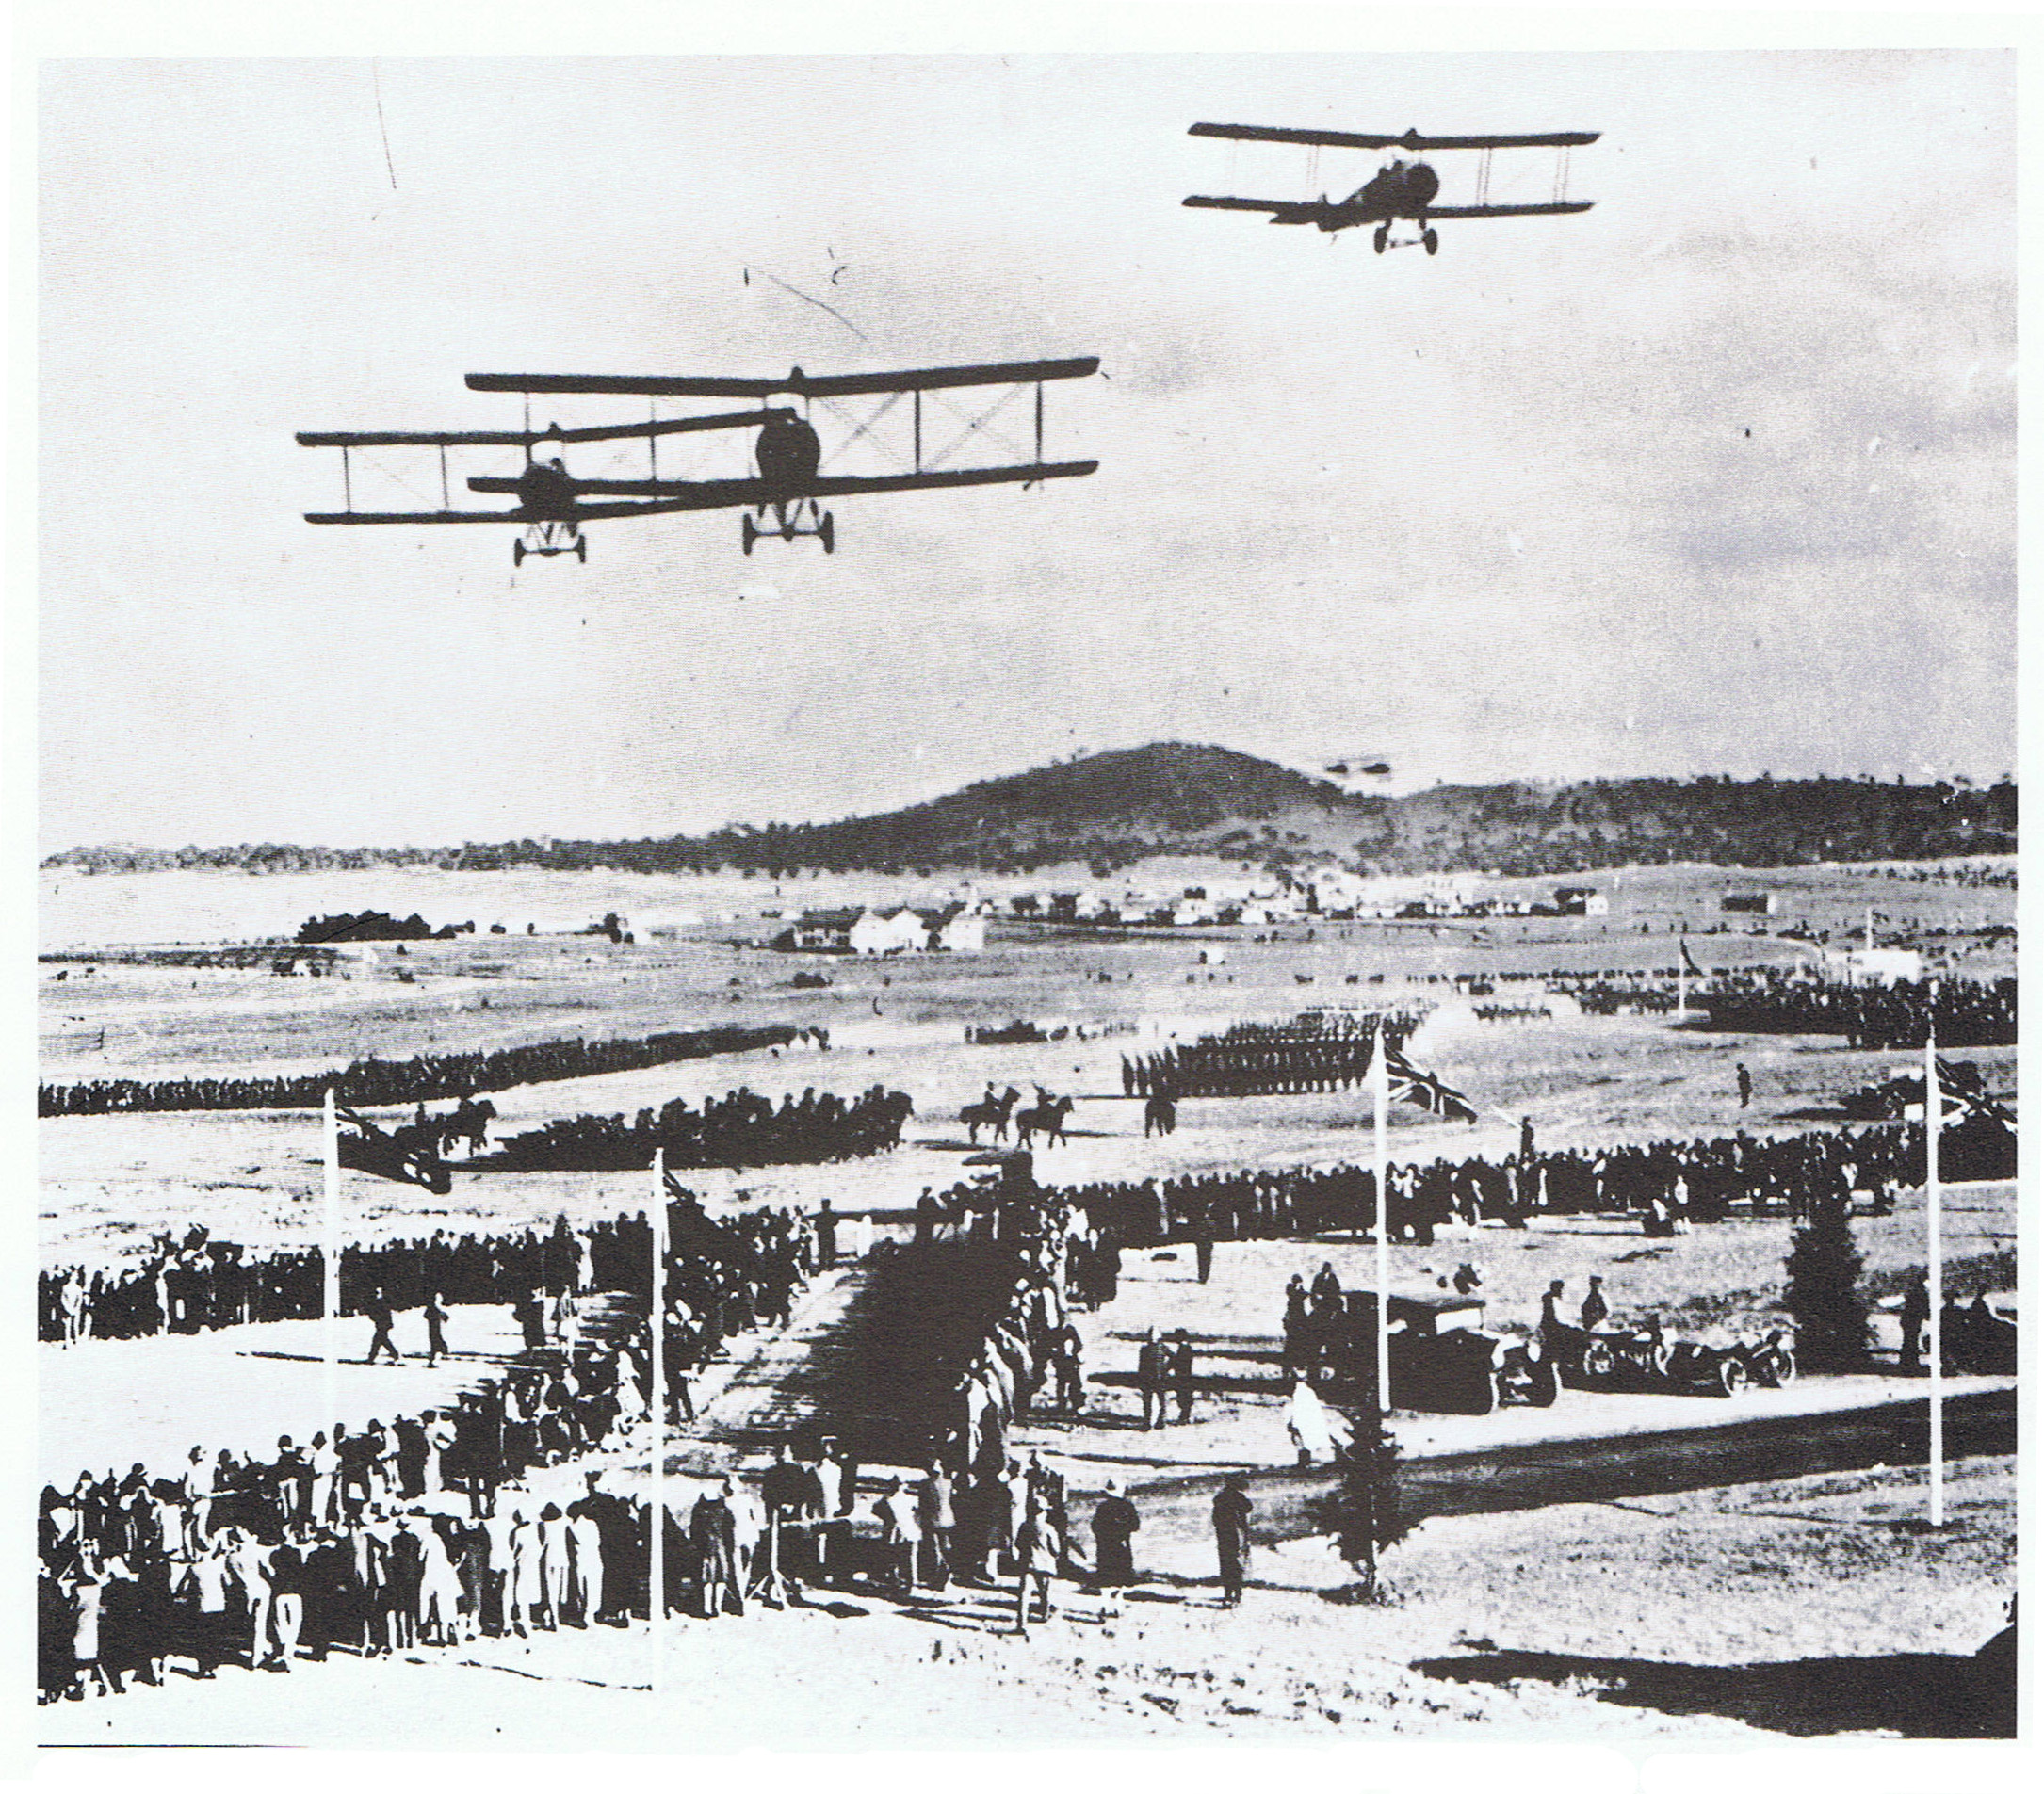 Mass flypast by aircraft